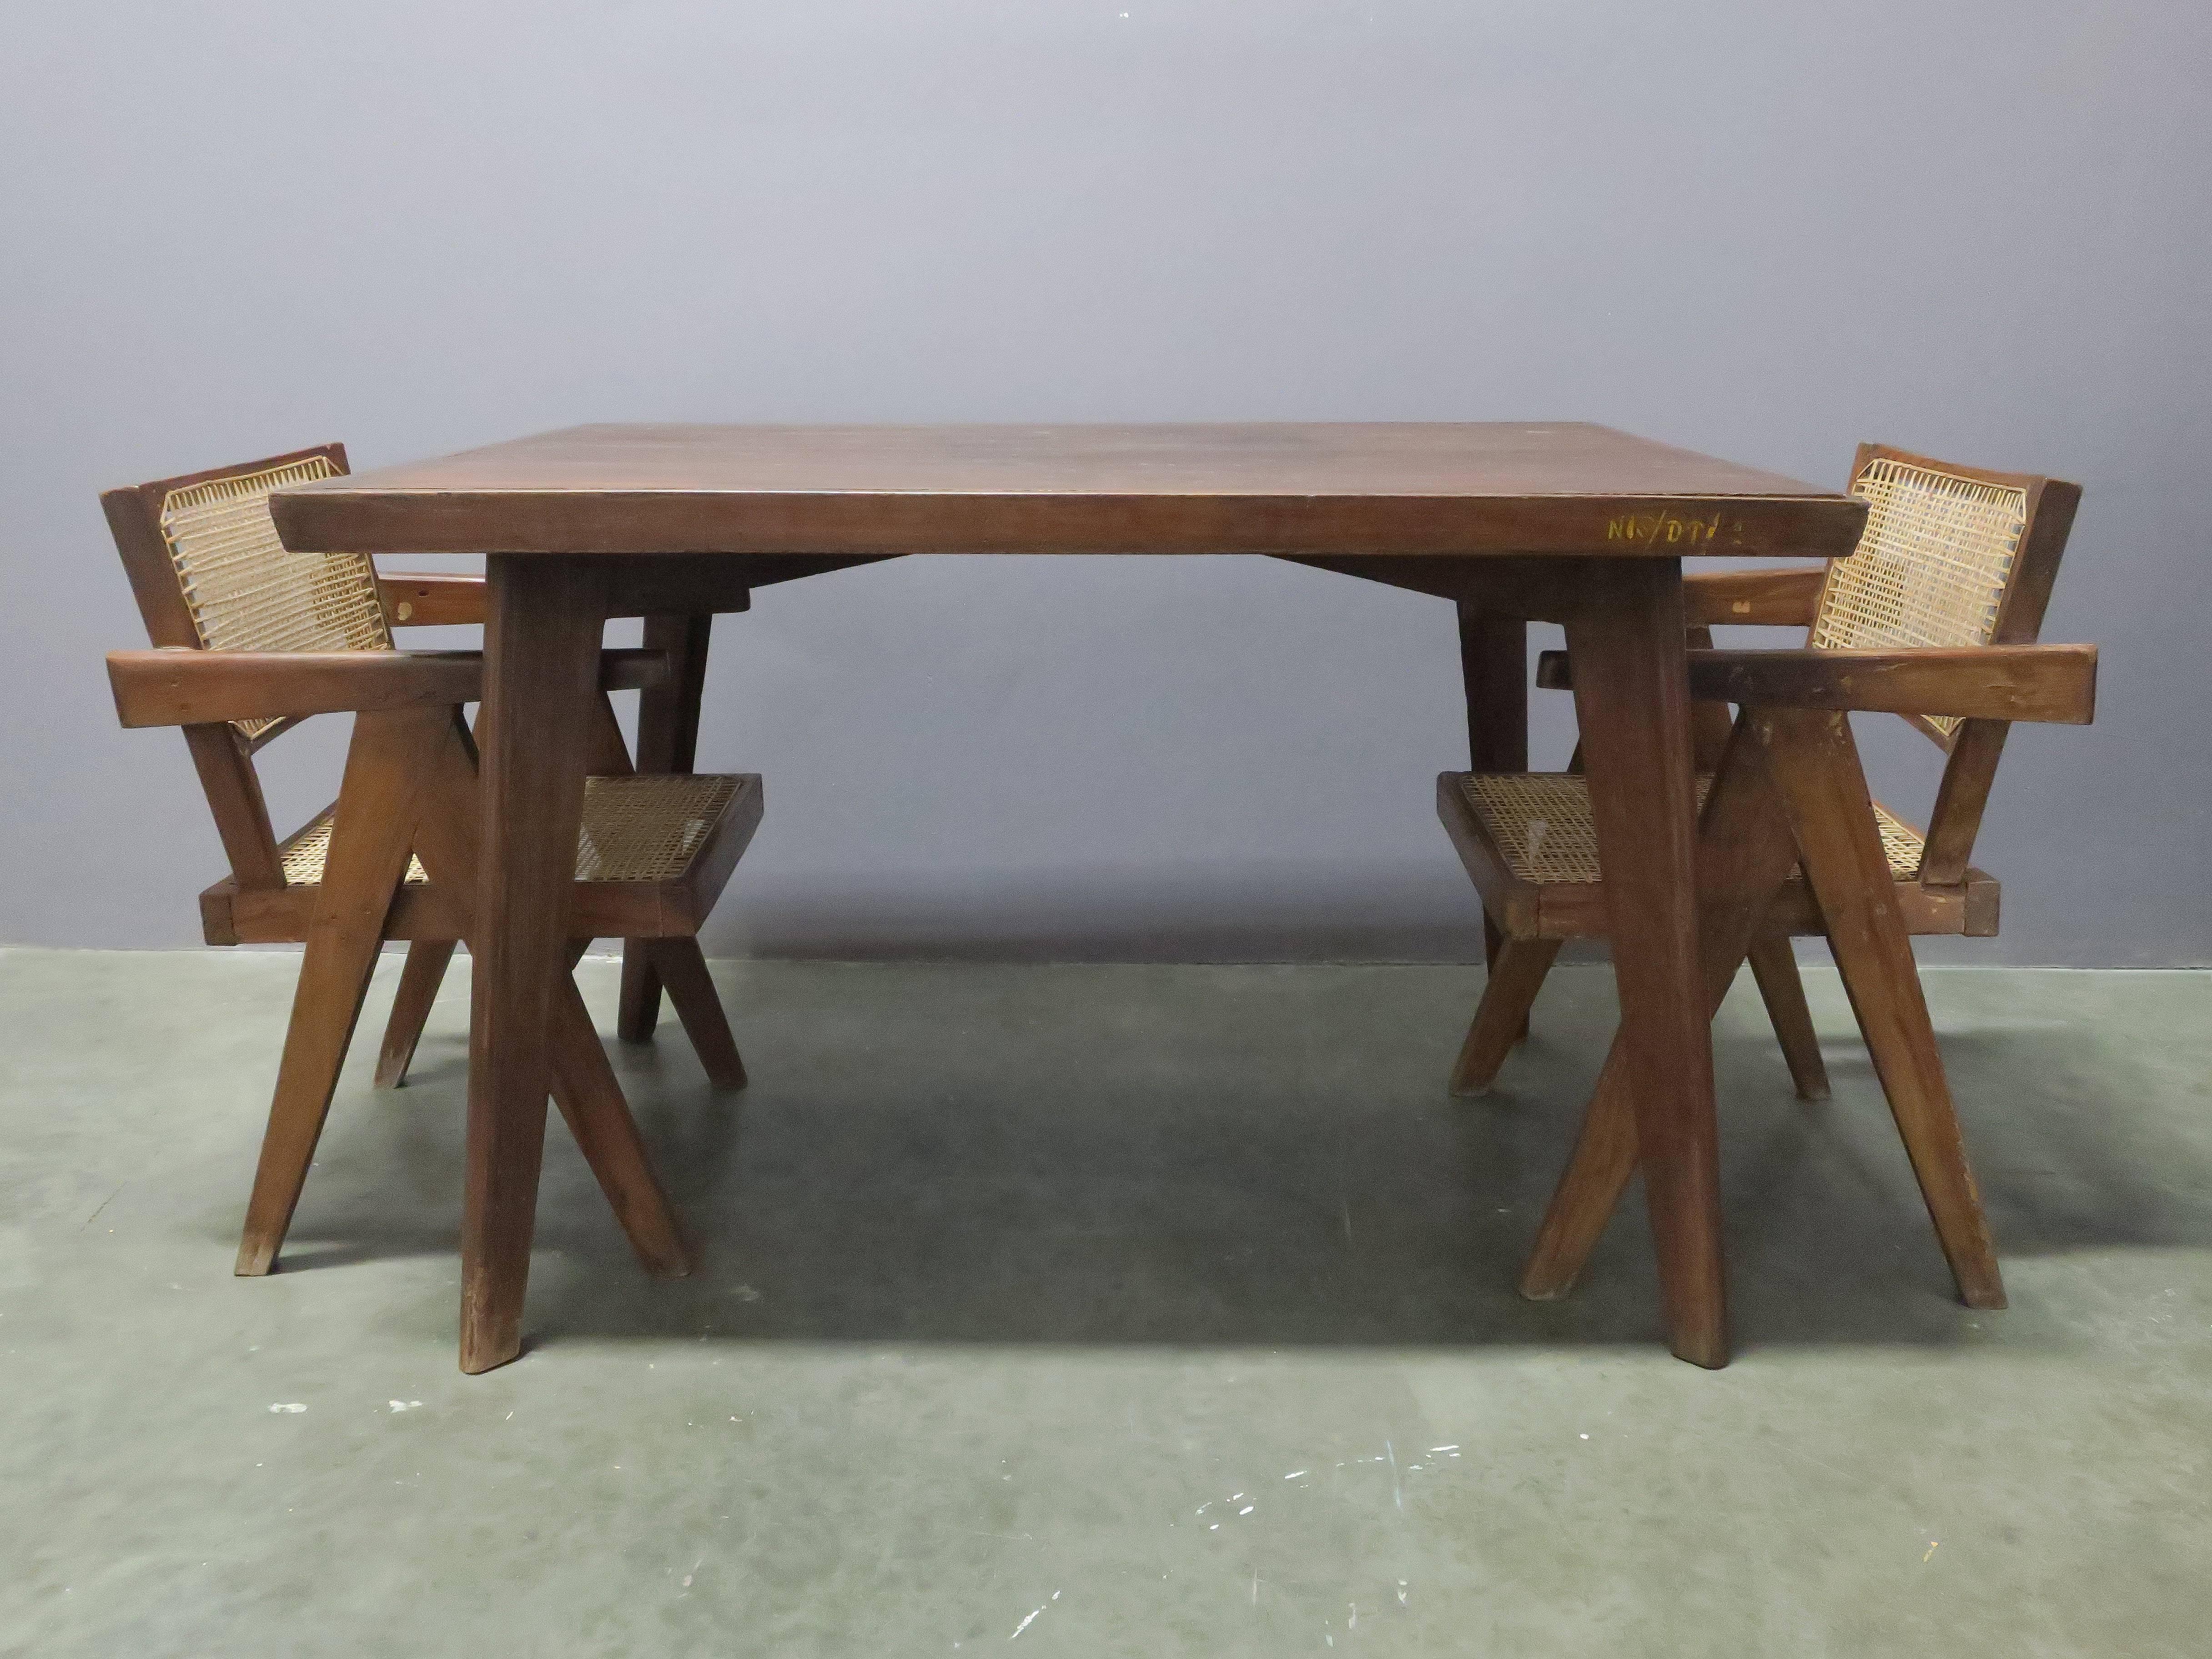 Original teak dining table from Chandigarh, India by Pierre Jeanneret. Solid teak construction.